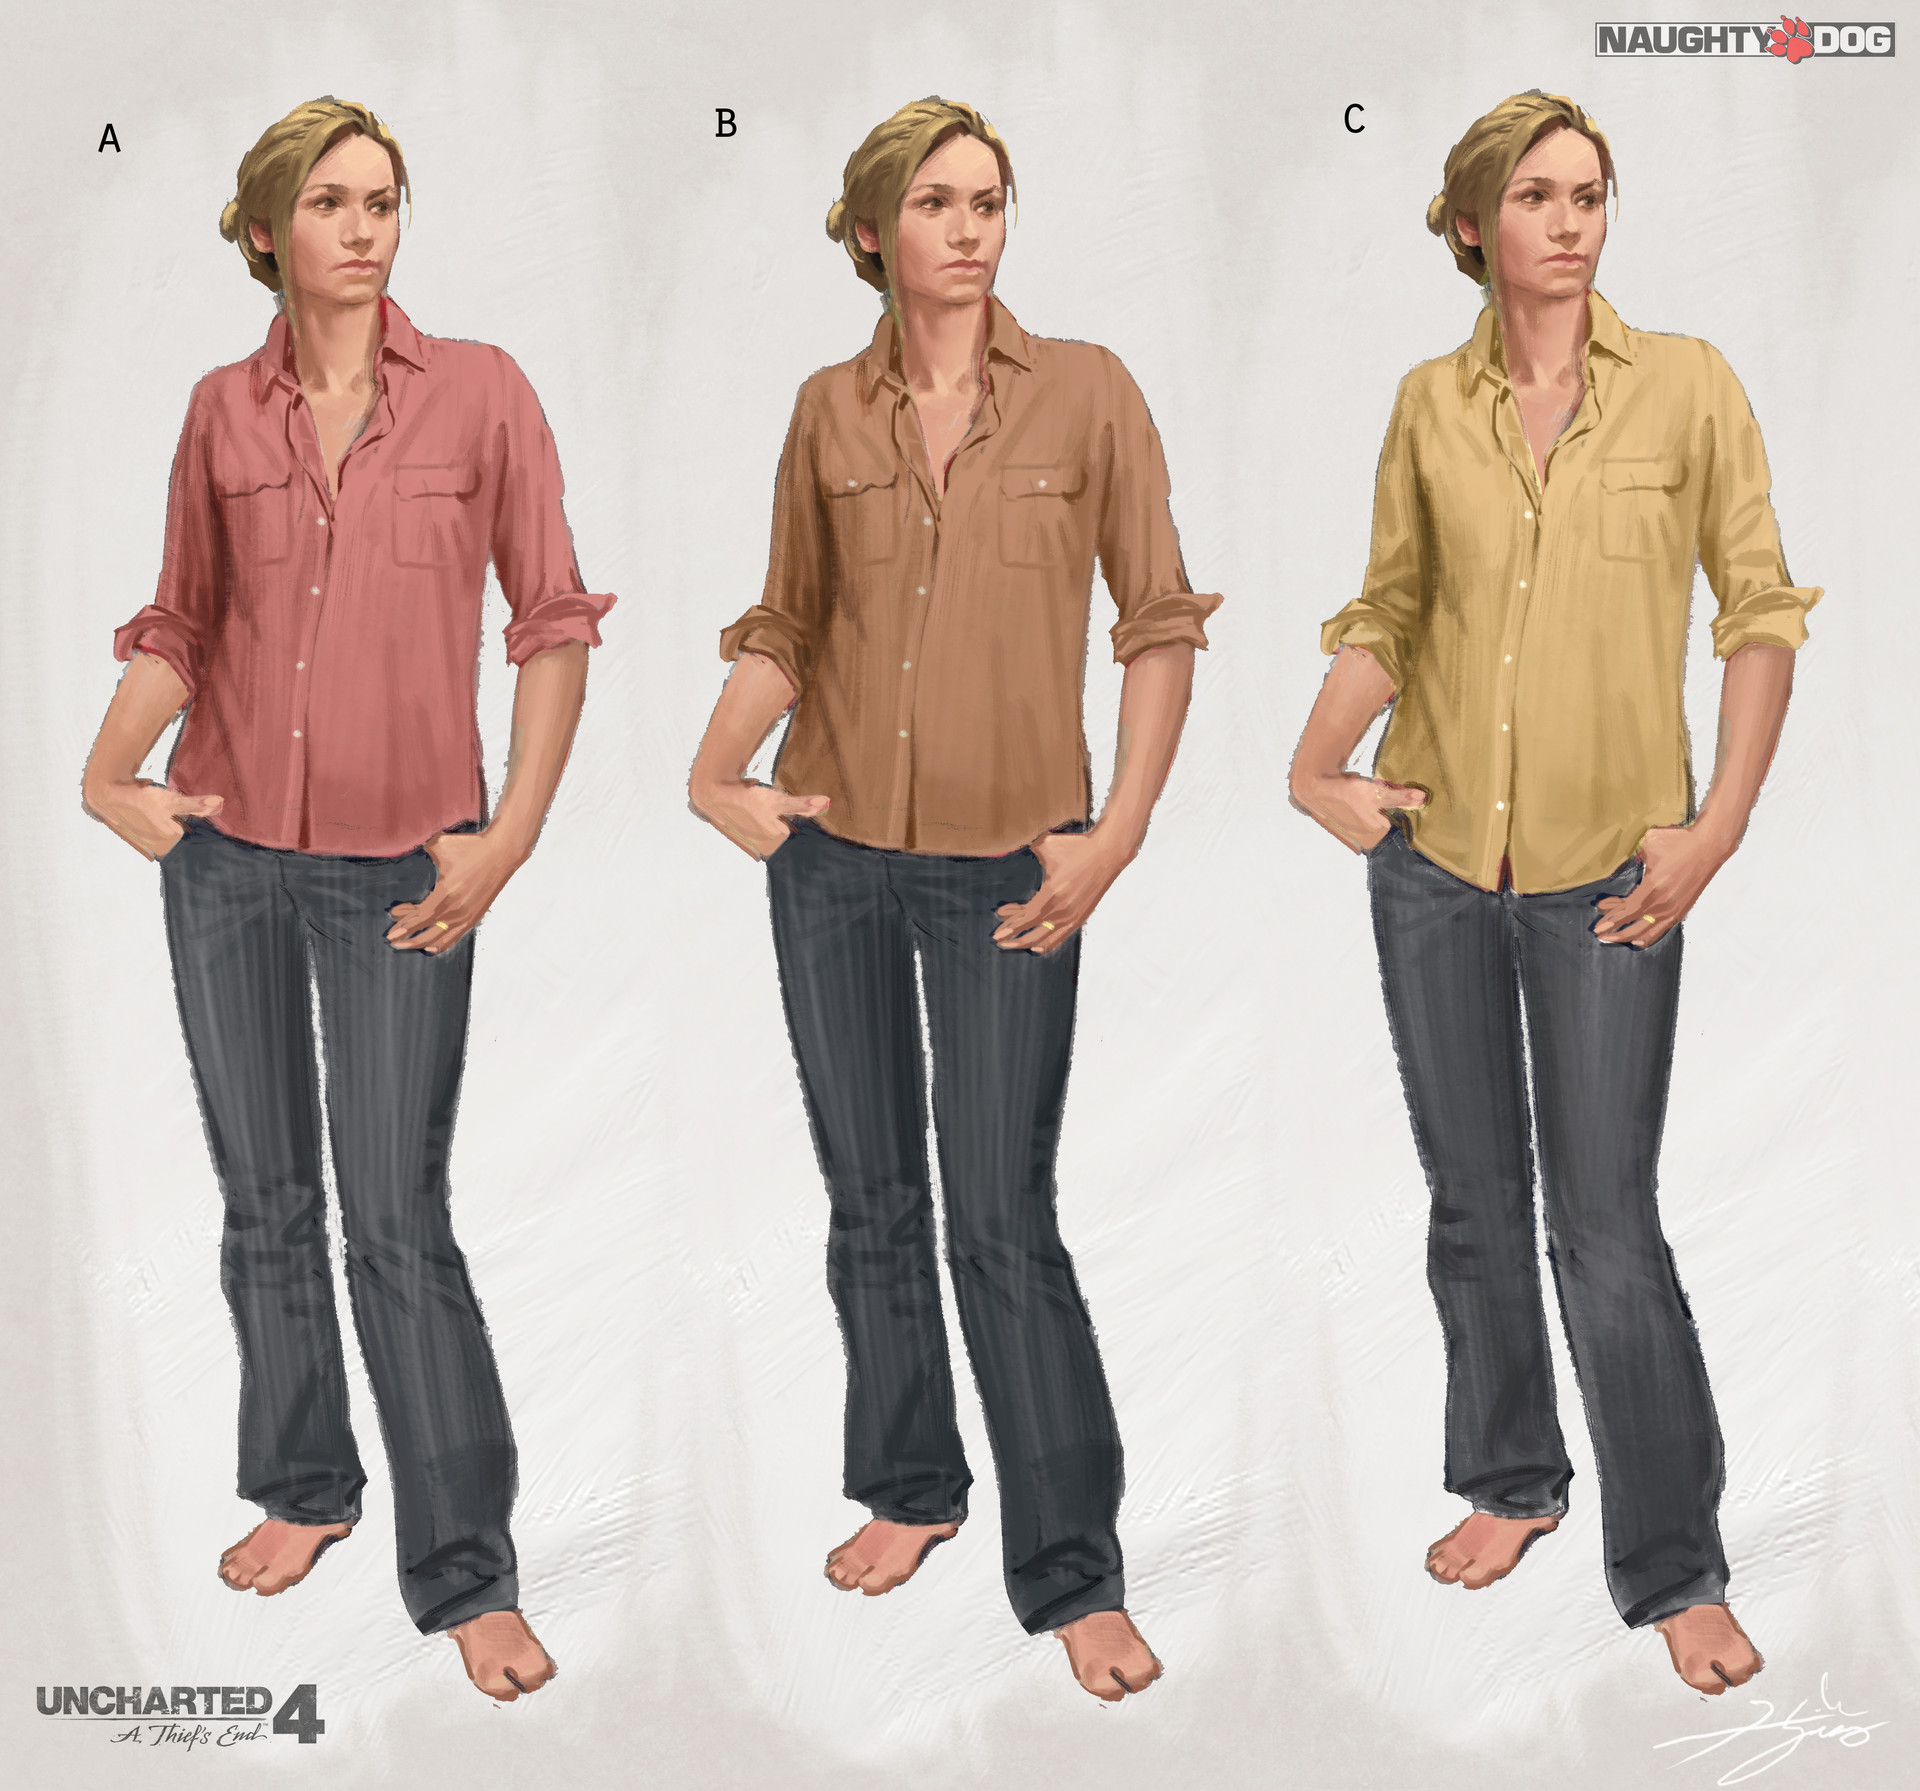 uncharted character concept art